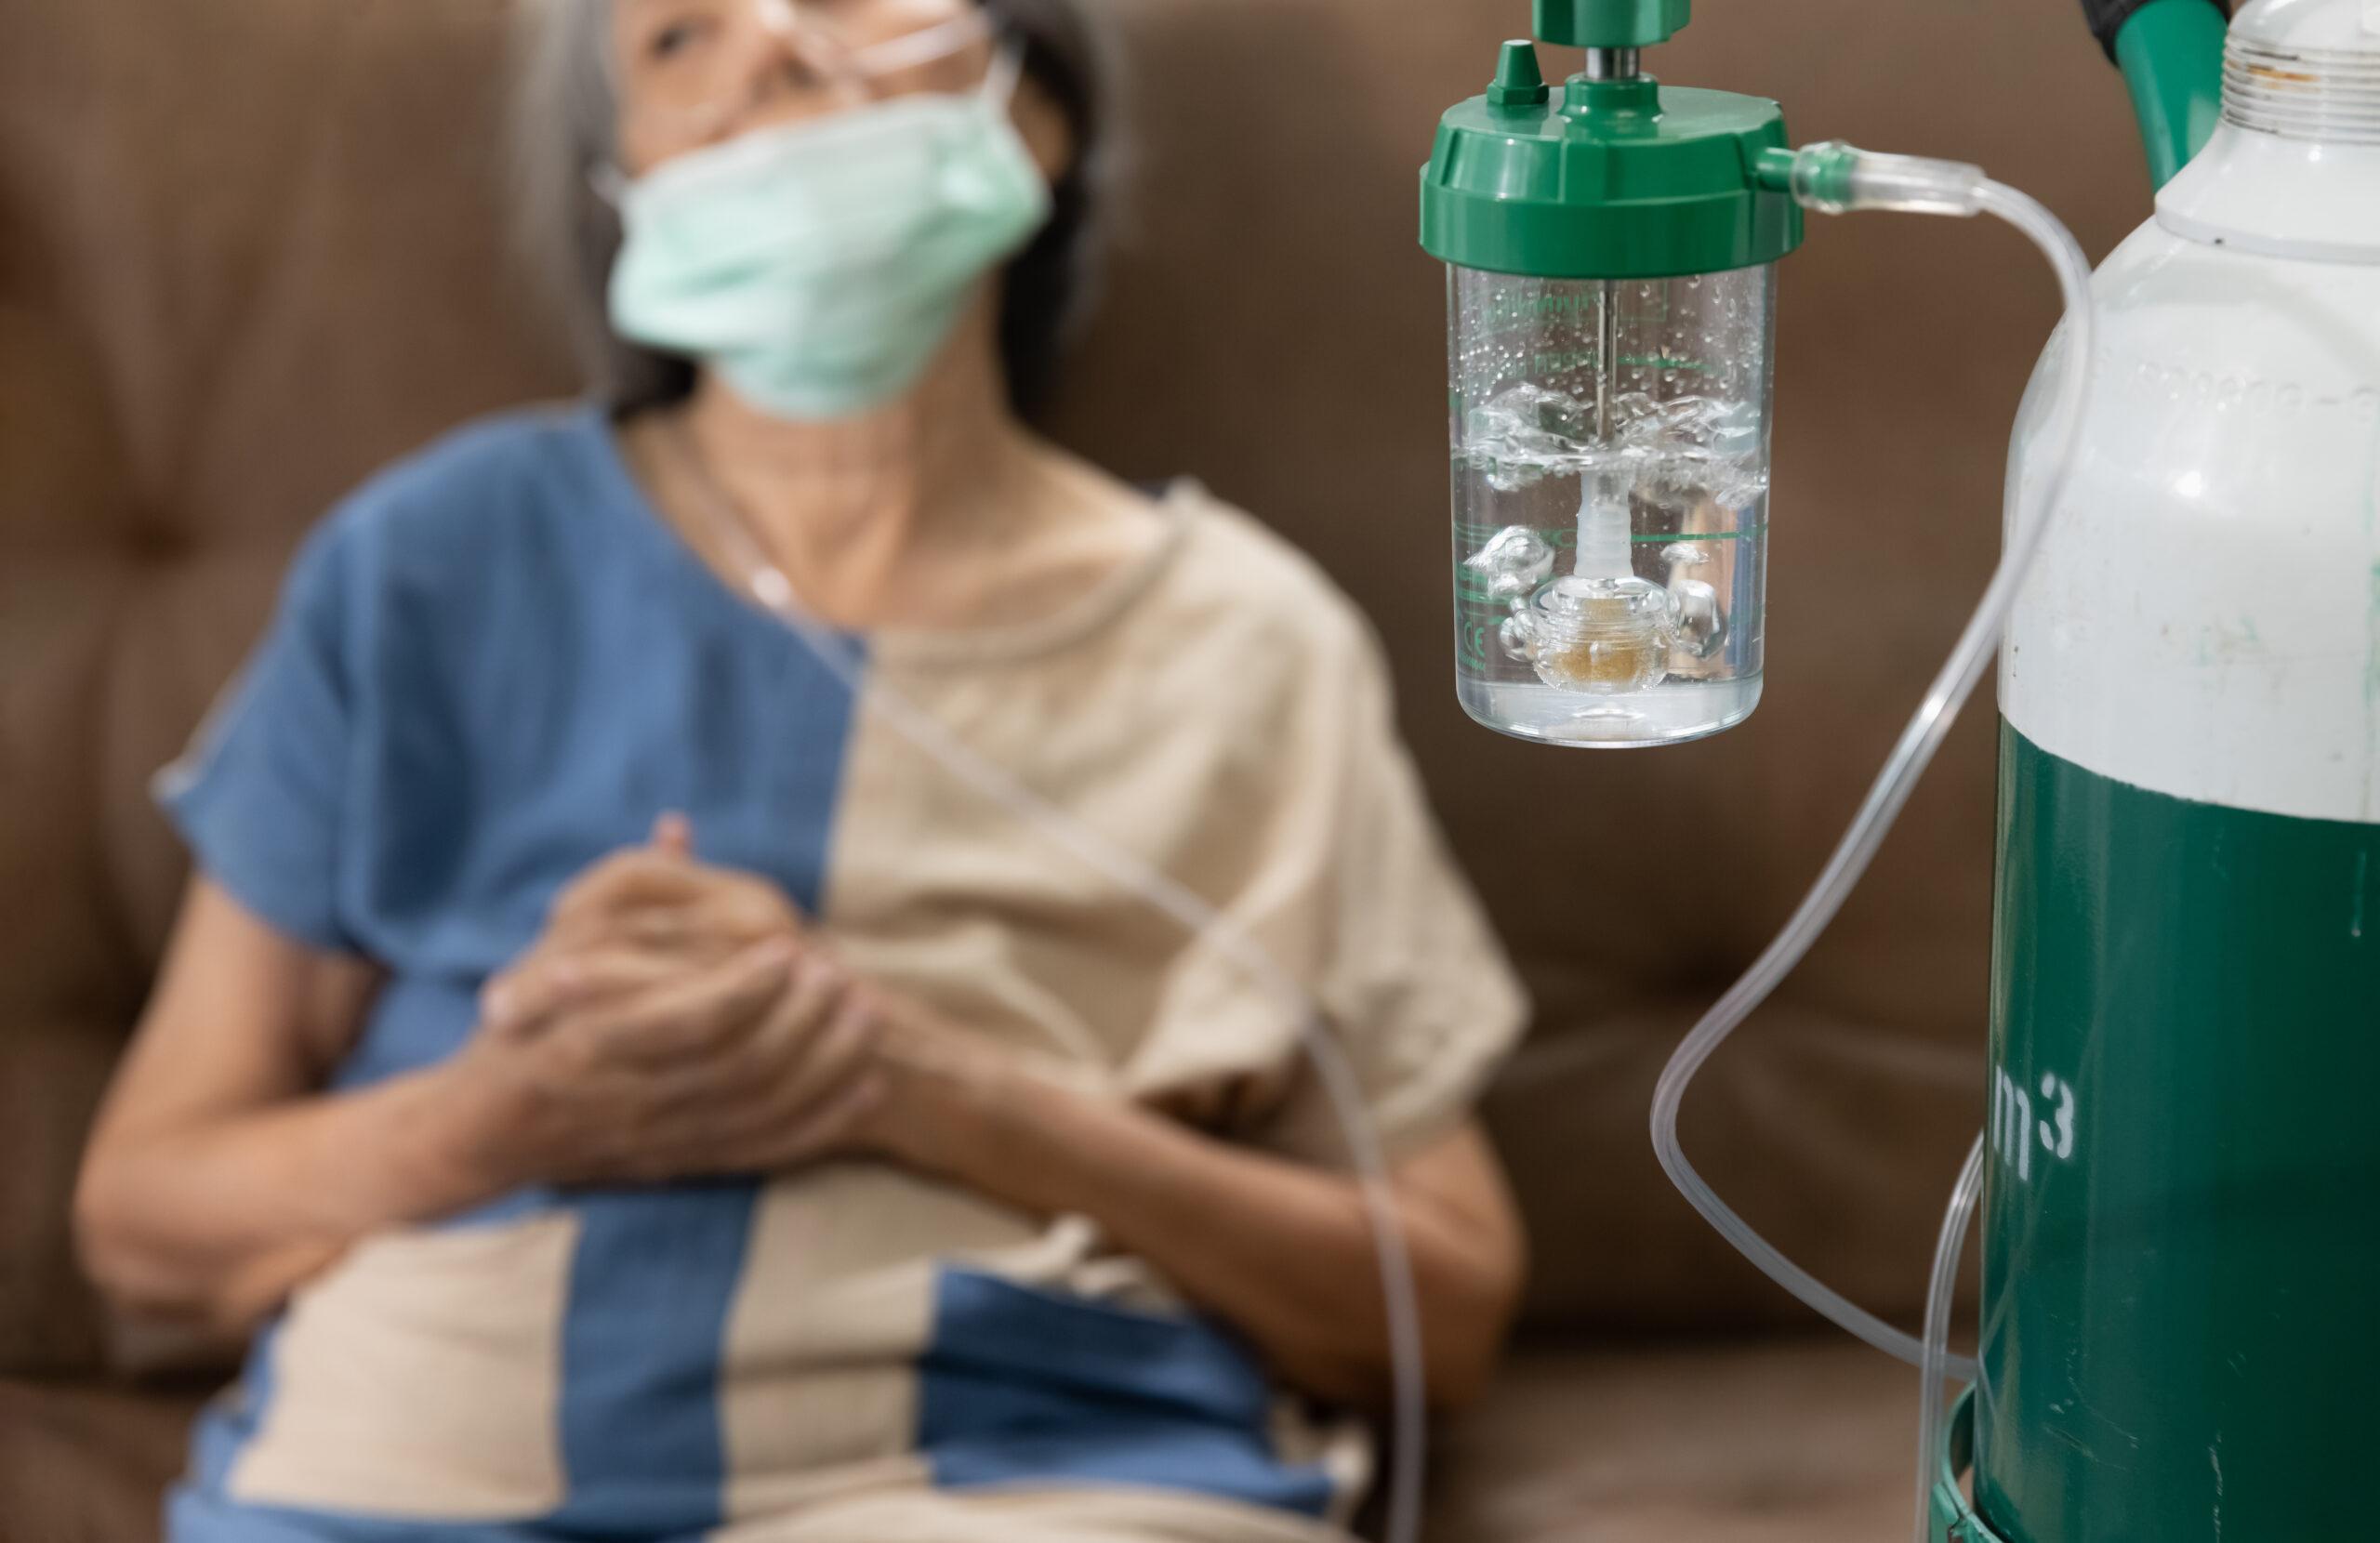 How to use oxygen tanks in hospice care